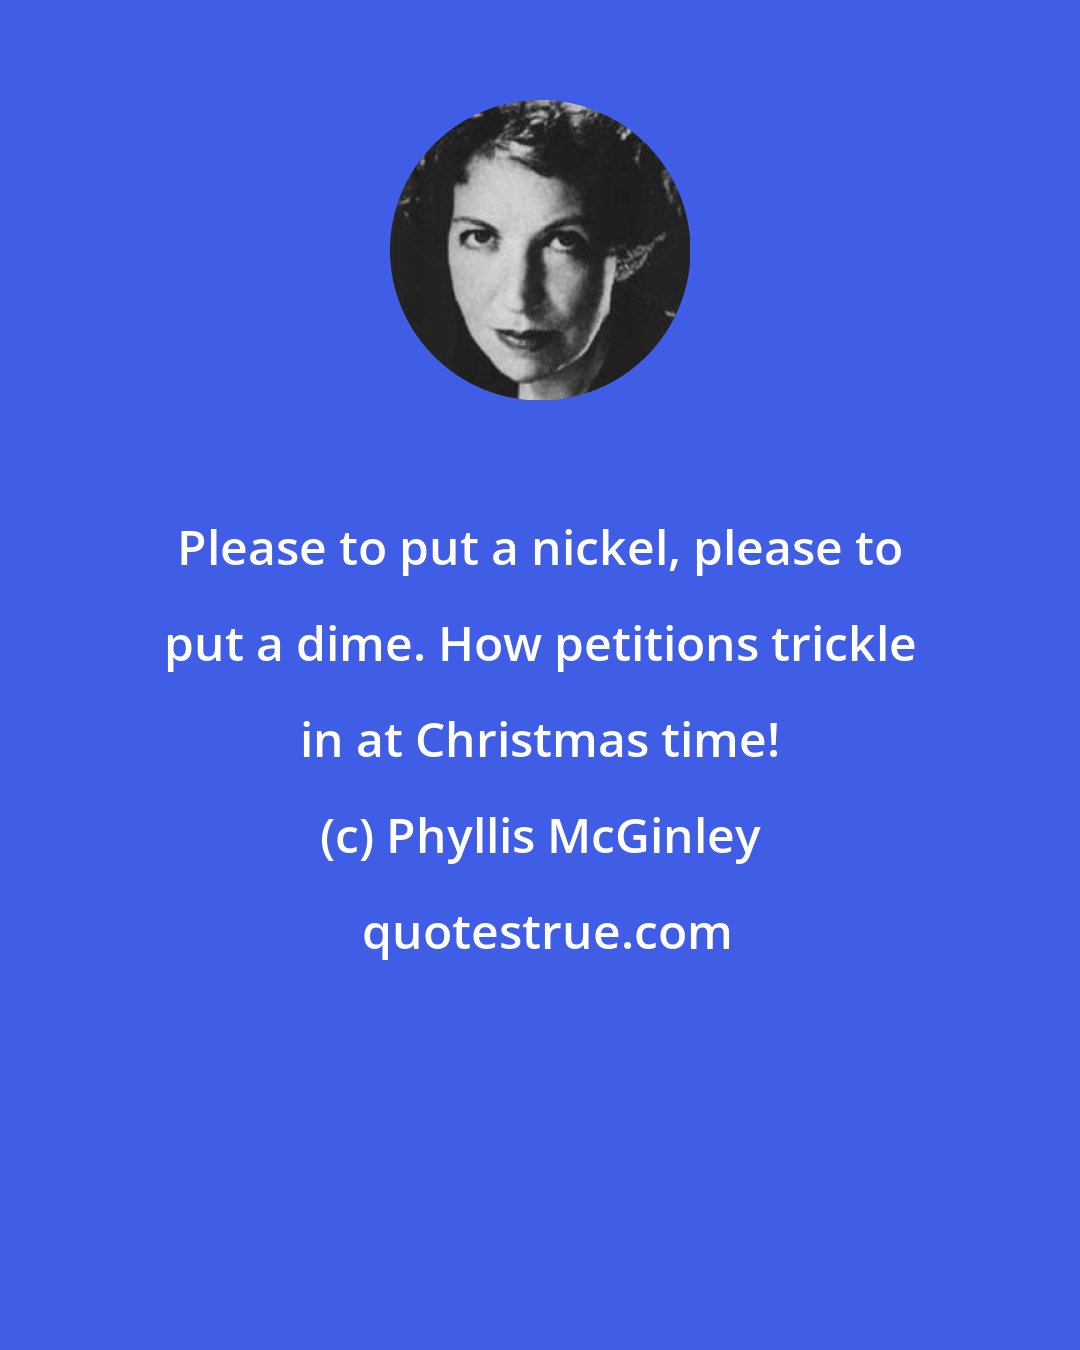 Phyllis McGinley: Please to put a nickel, please to put a dime. How petitions trickle in at Christmas time!